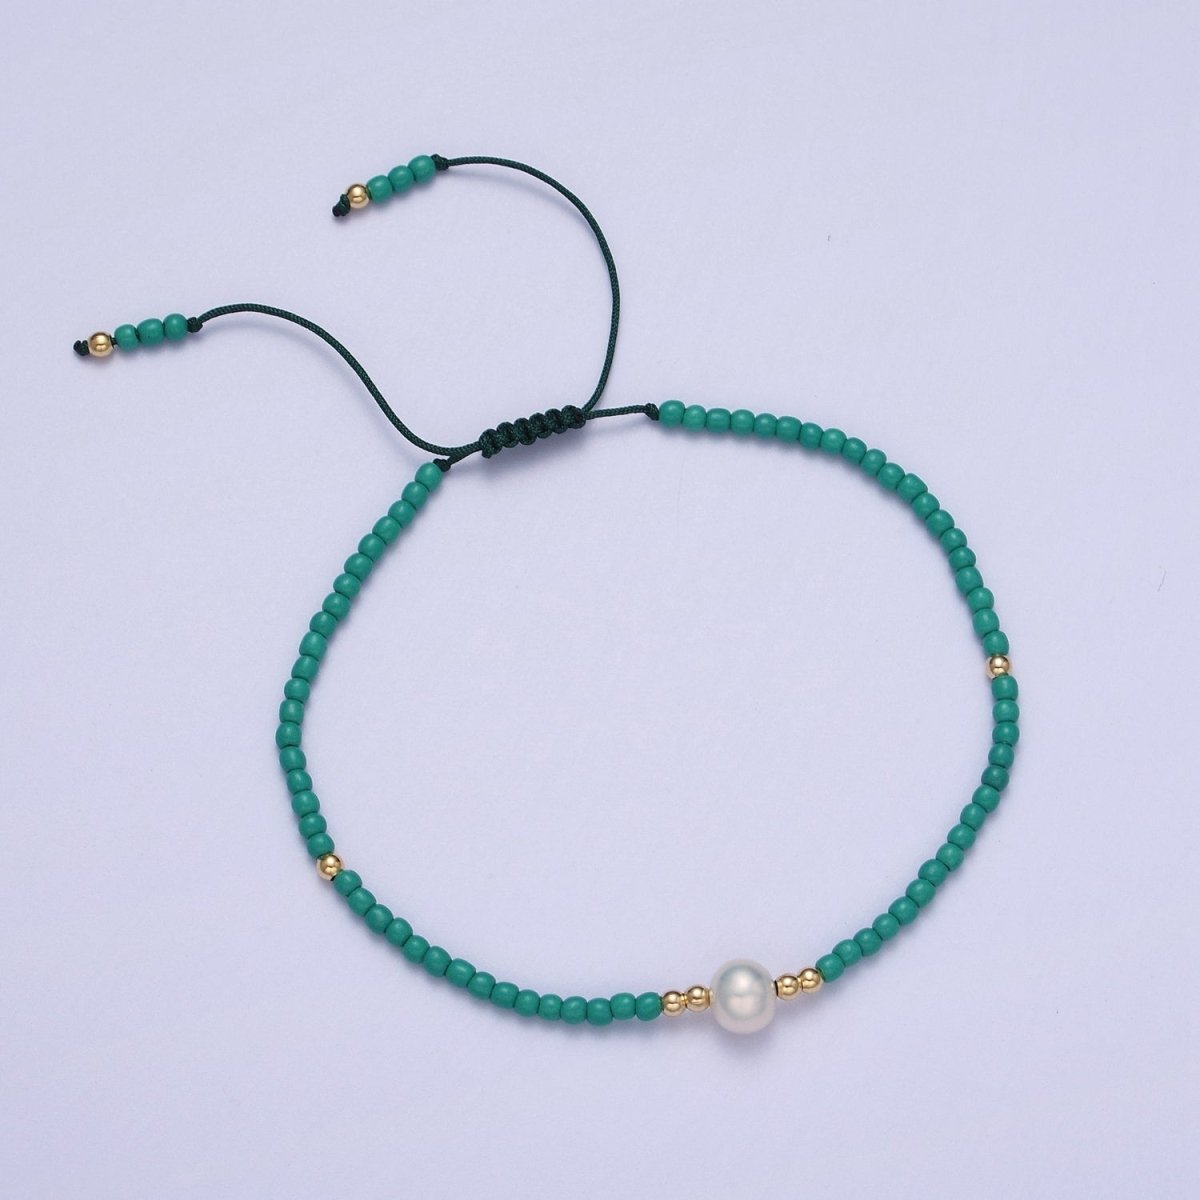 Handmade Pearl Glass Beads Knotted Adjustable Bracelet | WA-1258 - WA-1264 Clearance Pricing - DLUXCA